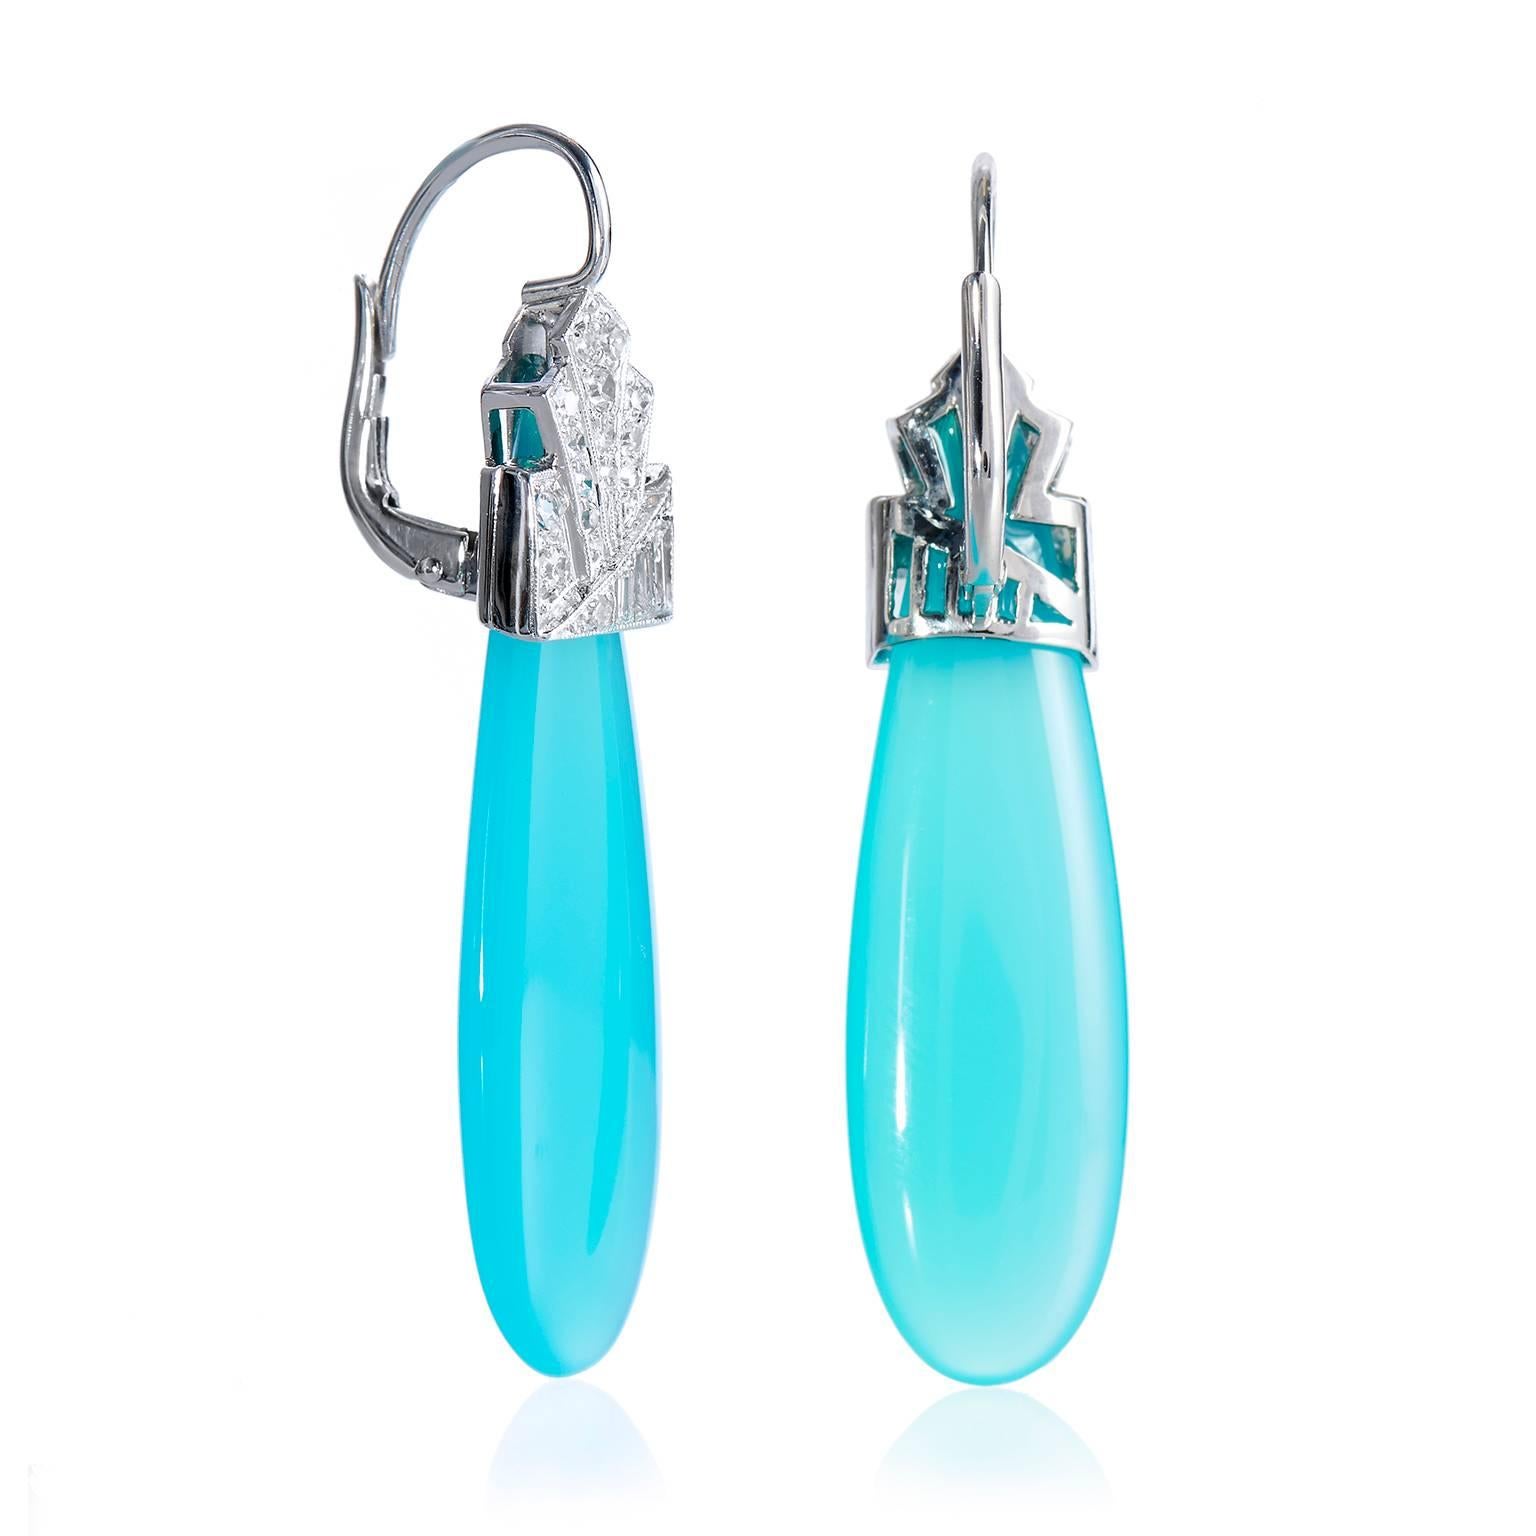 This set of platinum Art Déco style drop earrings are vibrant and playful with a dash of sophistication. The pair features Laguna Agate drops suspended by approximately .55cts of baguette and single cut diamonds.